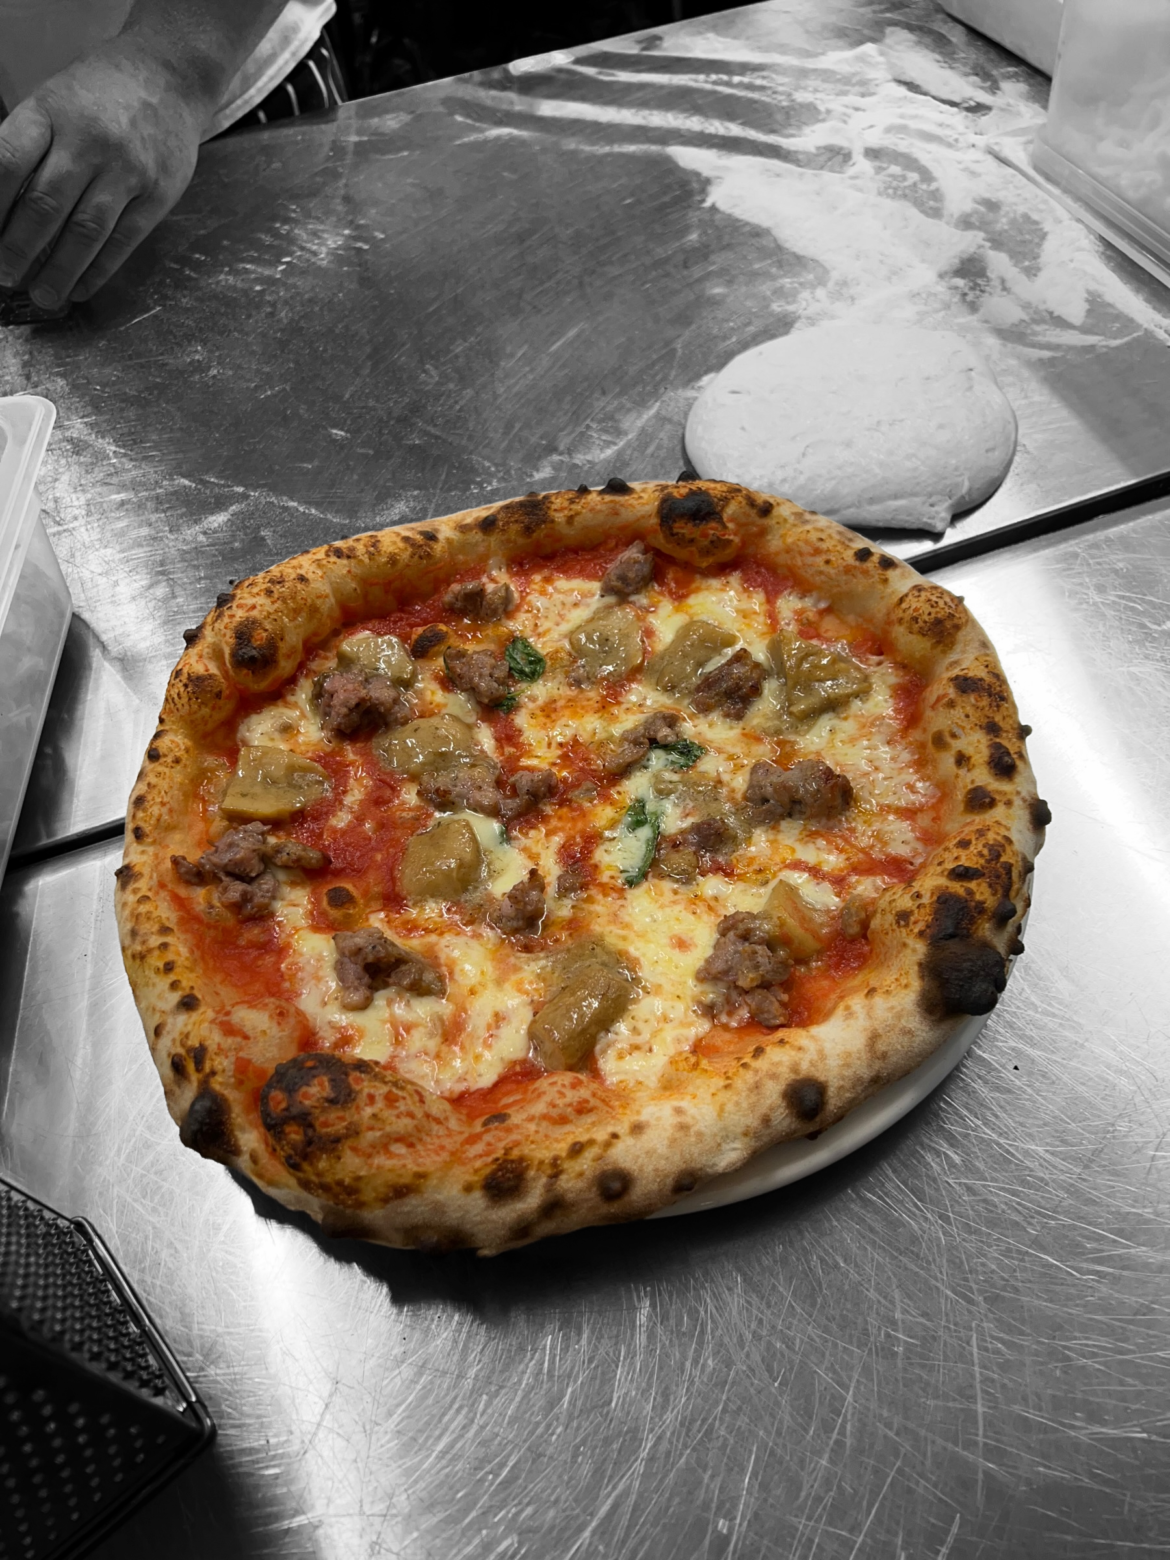 From Naples to Wales: A Delicious Journey through the History of Pizza